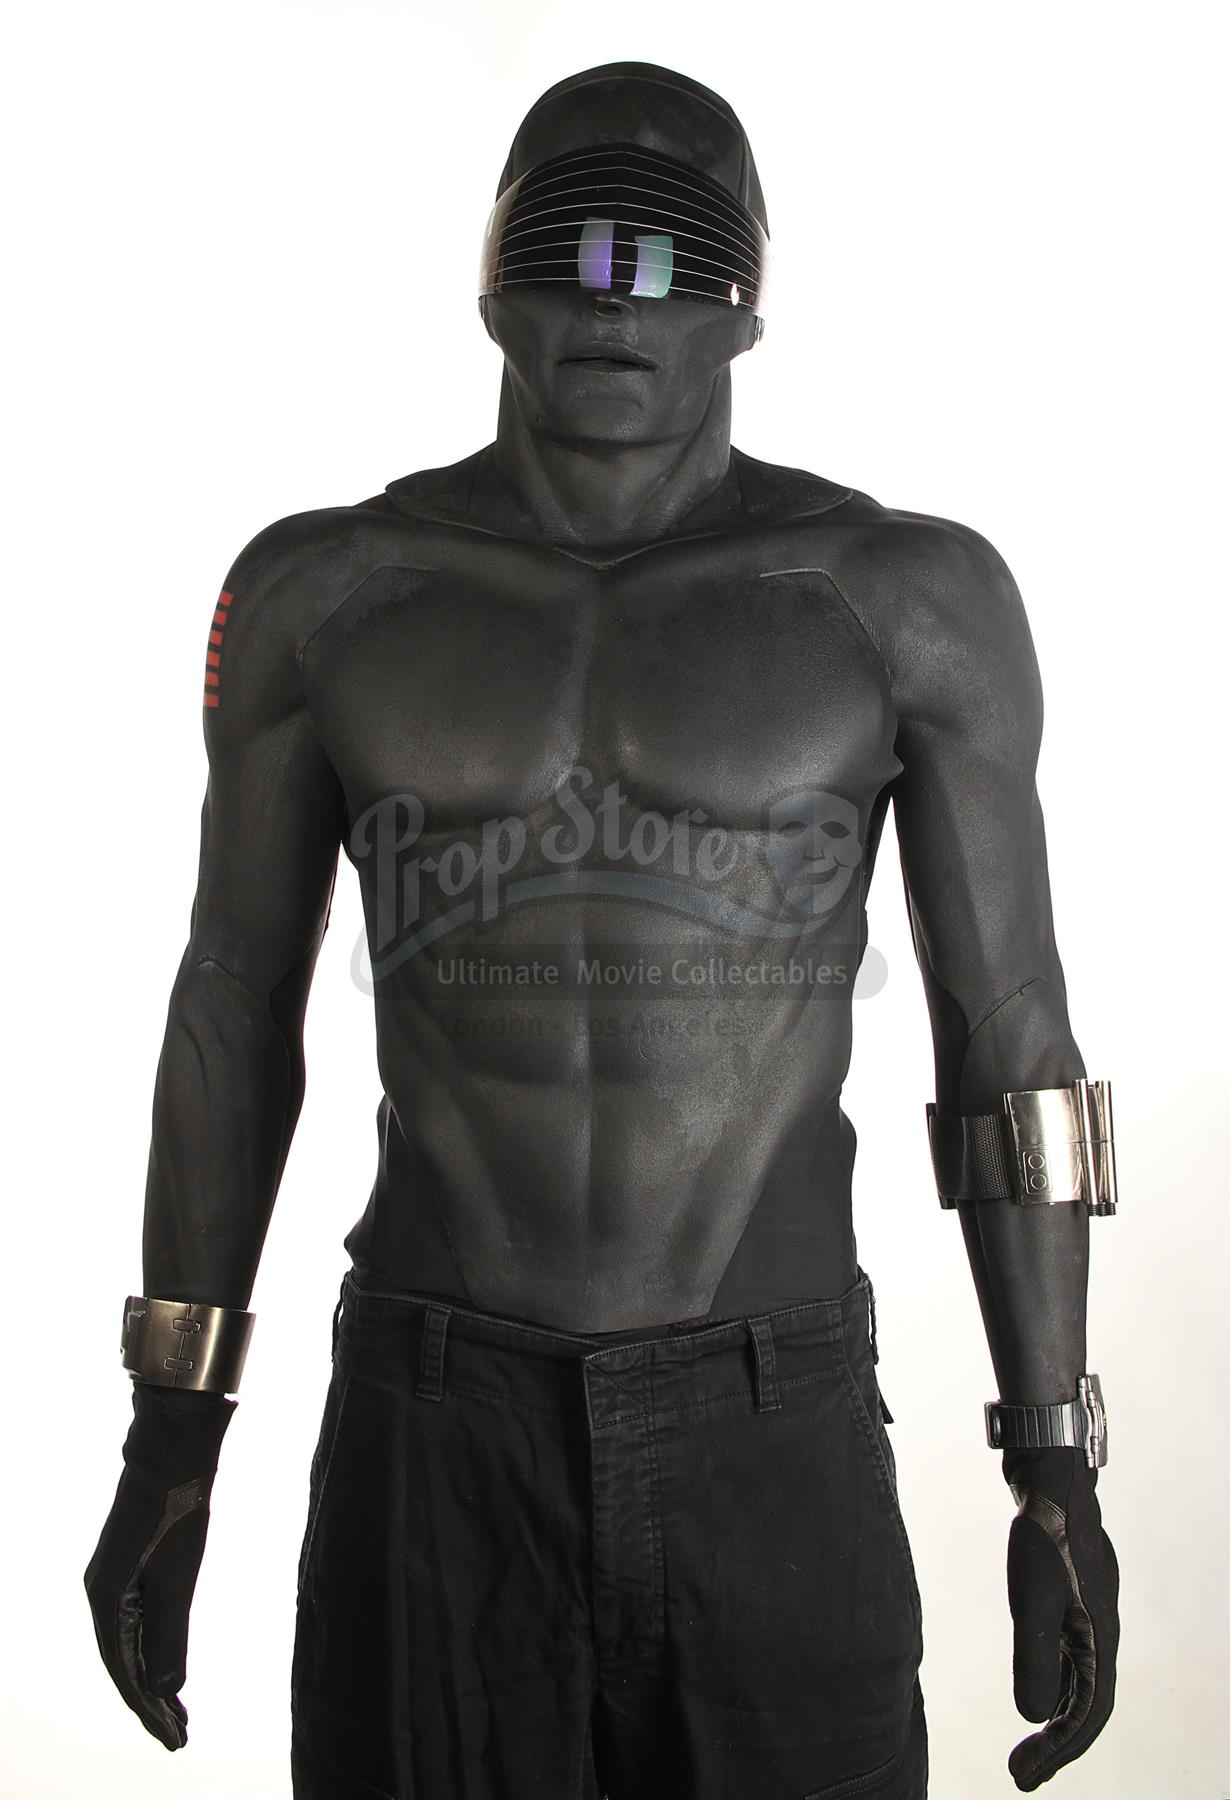 snake eyes suit replica for sale